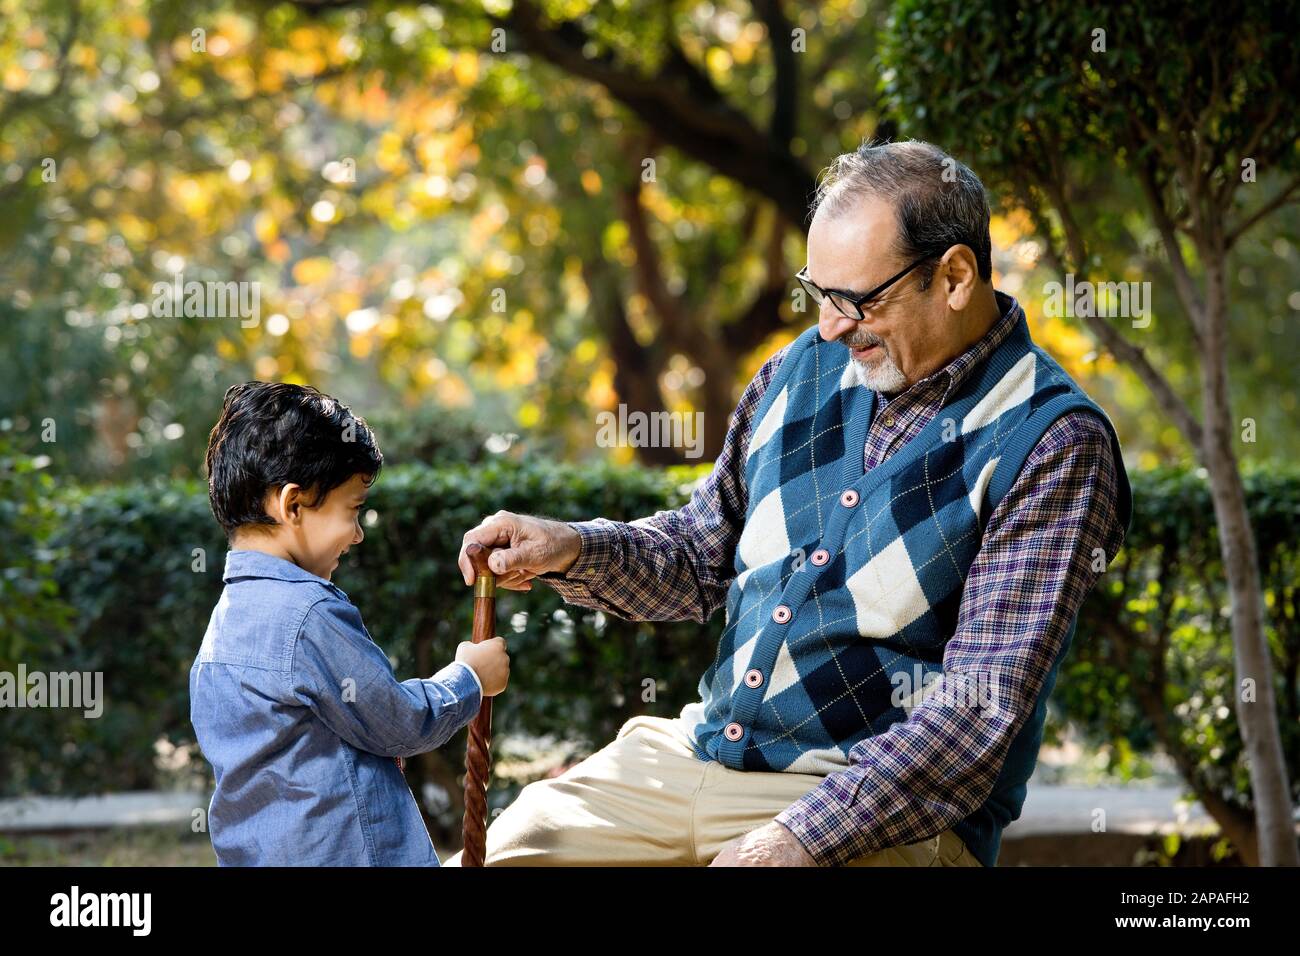 Loving grandfather playing with his grandson at park Stock Photo